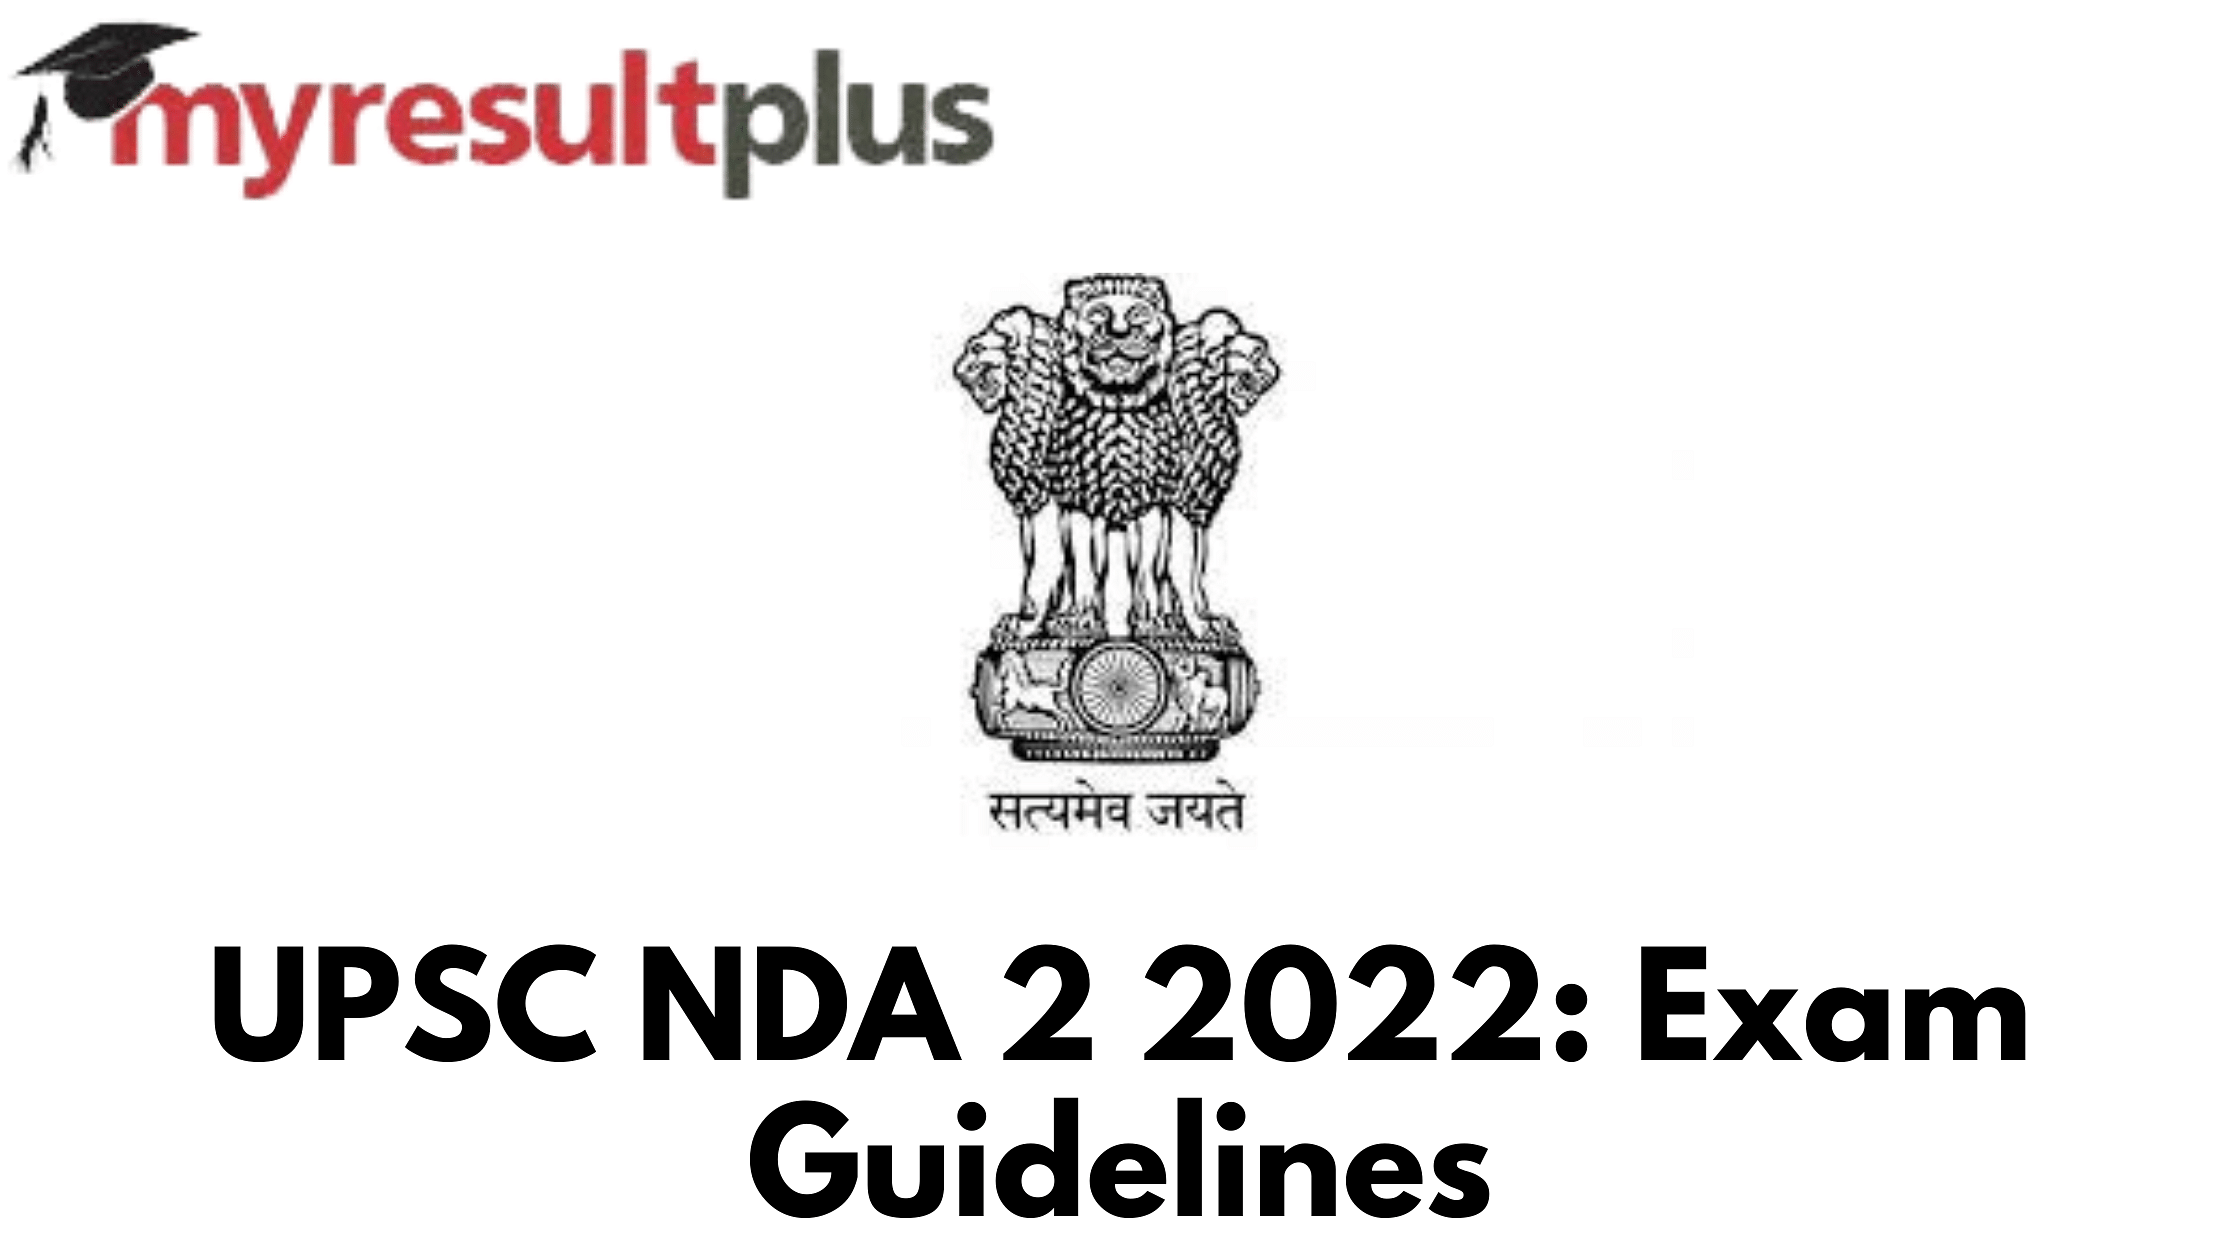 UPSC NDA 2 2022 Exam To Be Held Tomorrow, Know Guidelines Here